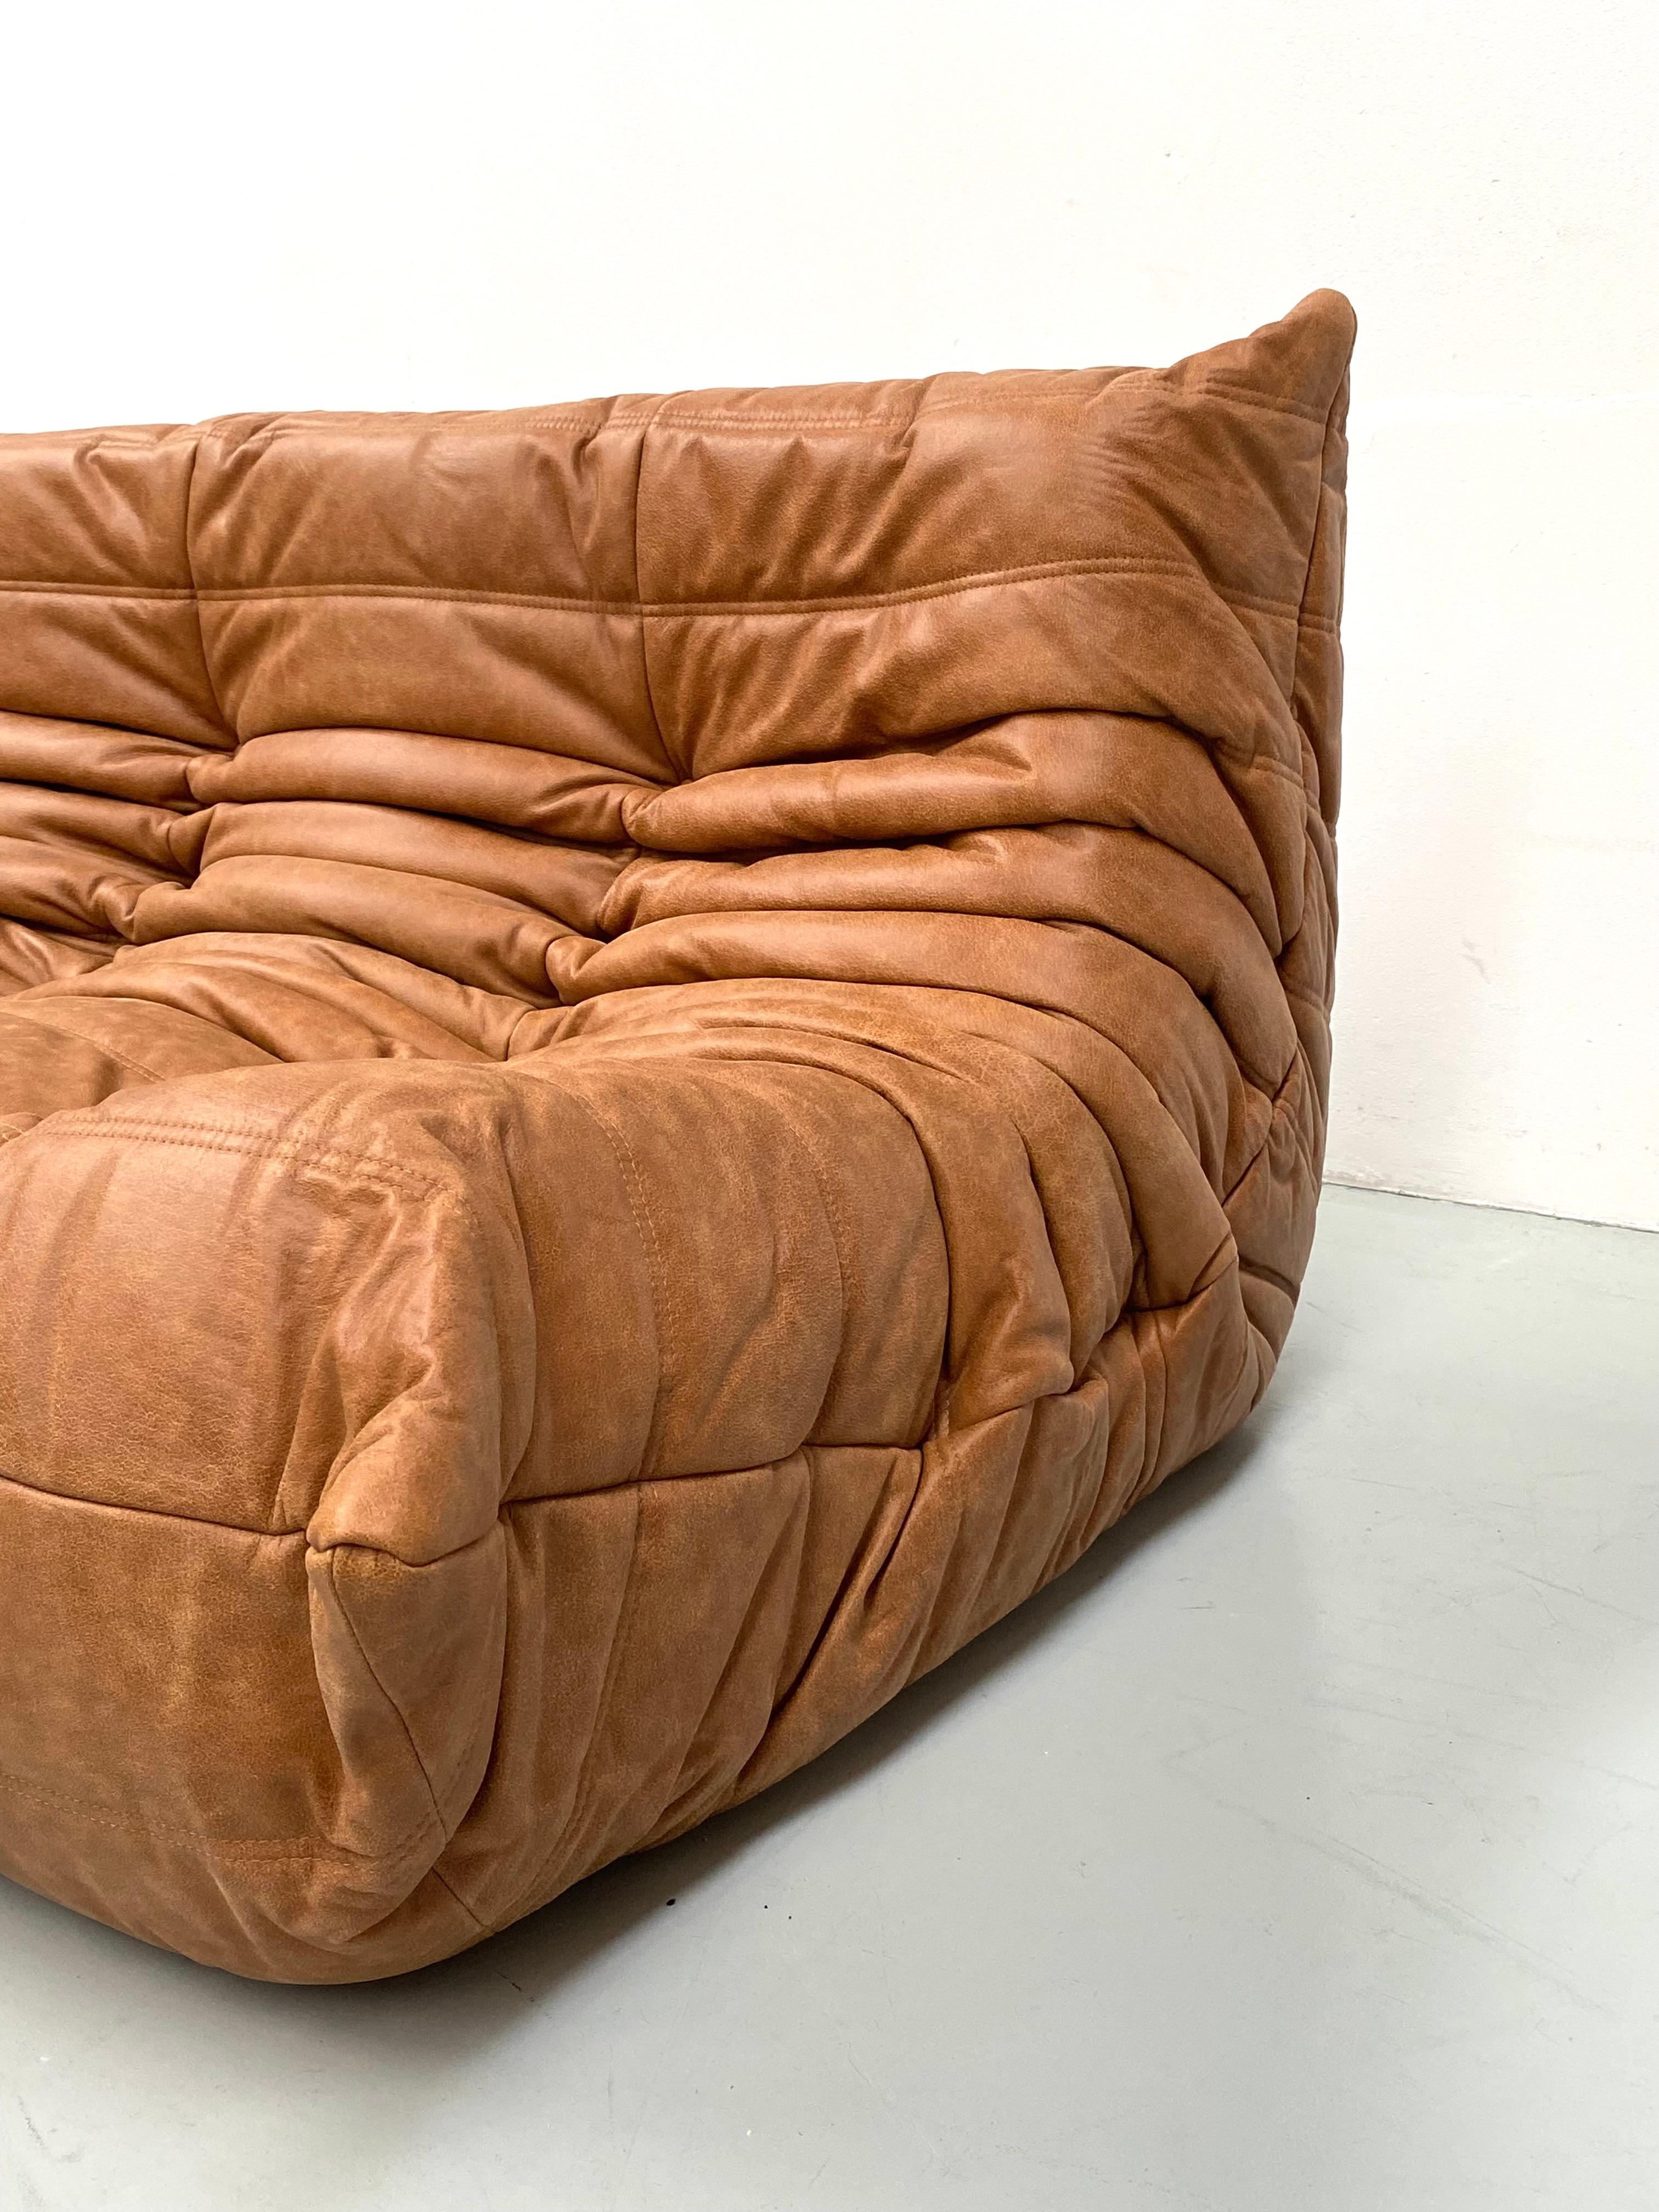 20th Century French Togo Sofa in Vintage Cognac Leather by M. Ducaroy for Ligne Roset, 1970s